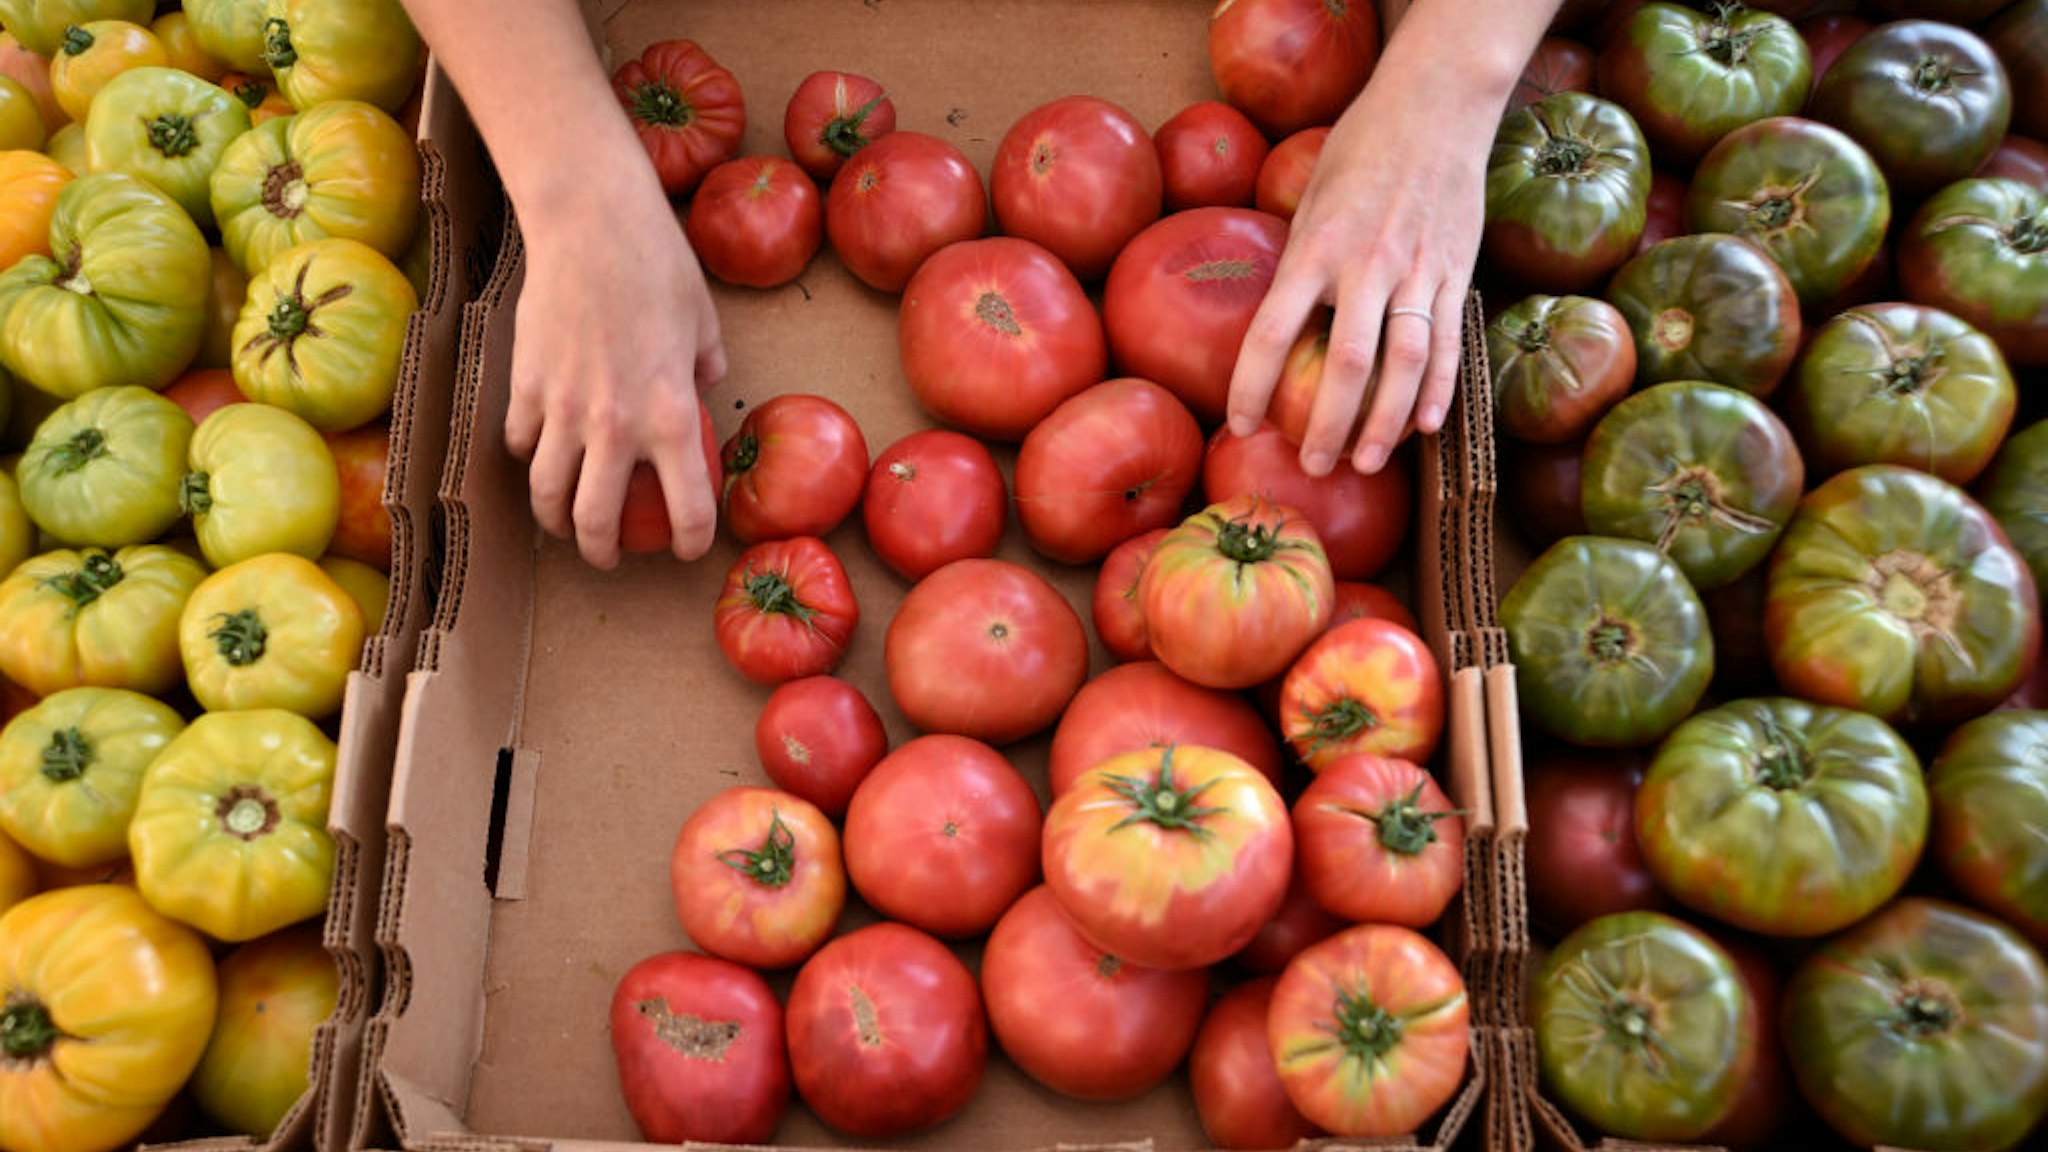 DENVER, COLORADO - AUGUST 31, 2019: A woman arranges her display of heirloom tomatoes at a Saturday vegetable market in downtown Denver, Colorado. (Photo by Robert Alexander/Getty Images)